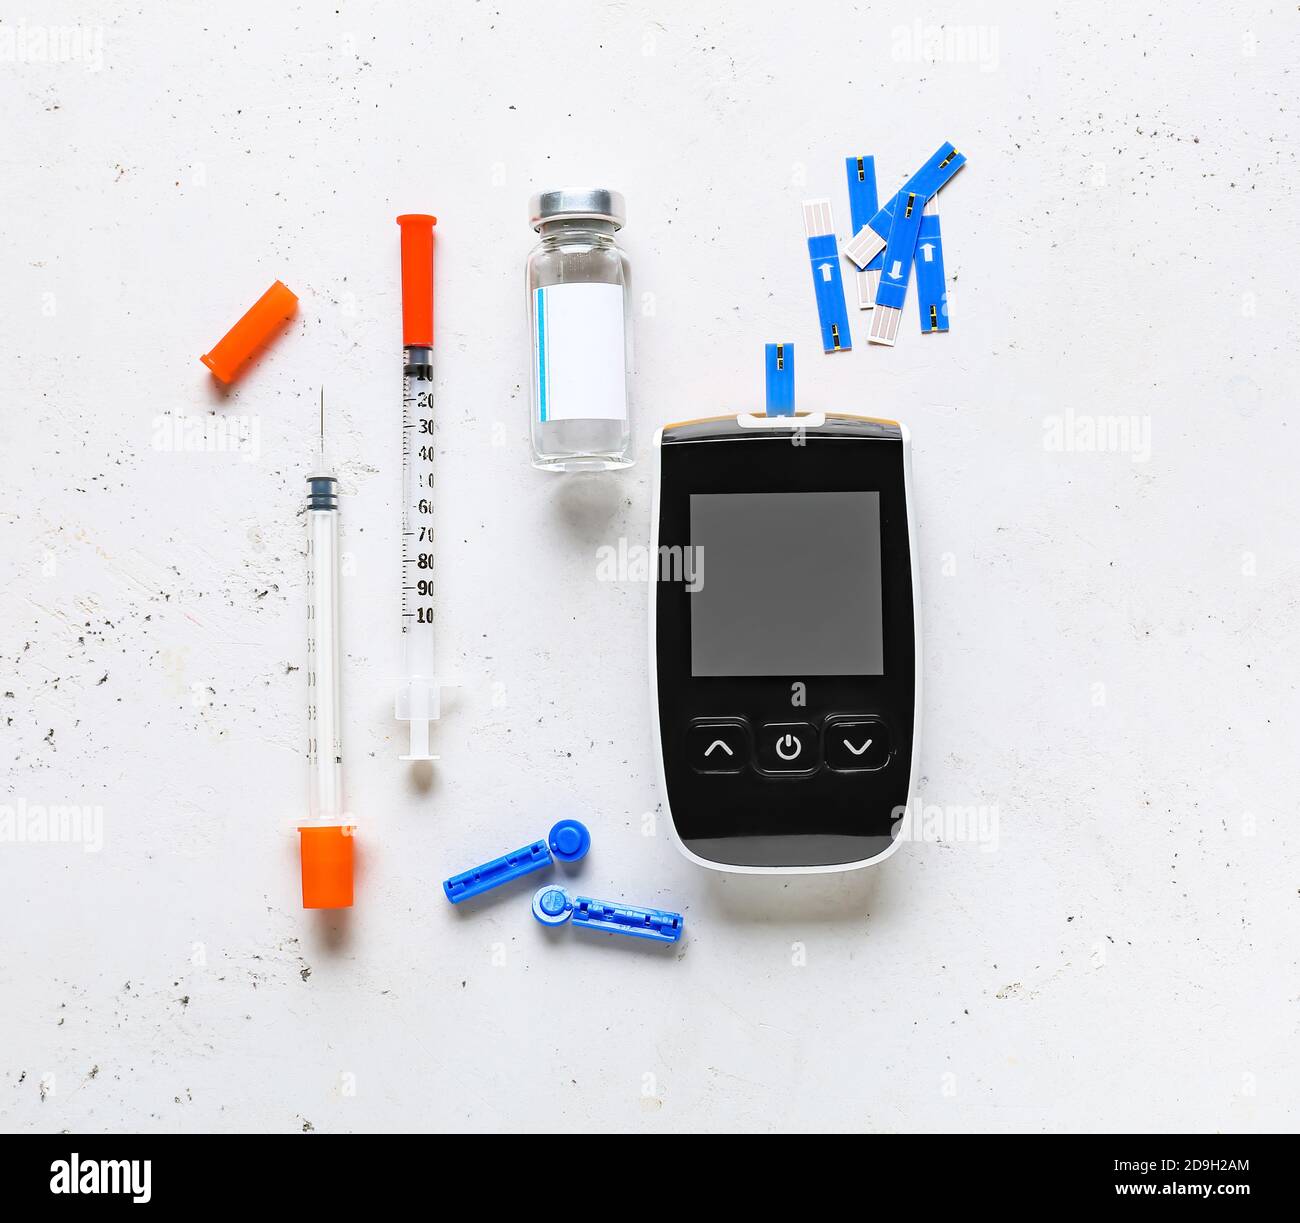 Glucometer, test strips, insulin and syringes on white background. Diabetes concept Stock Photo